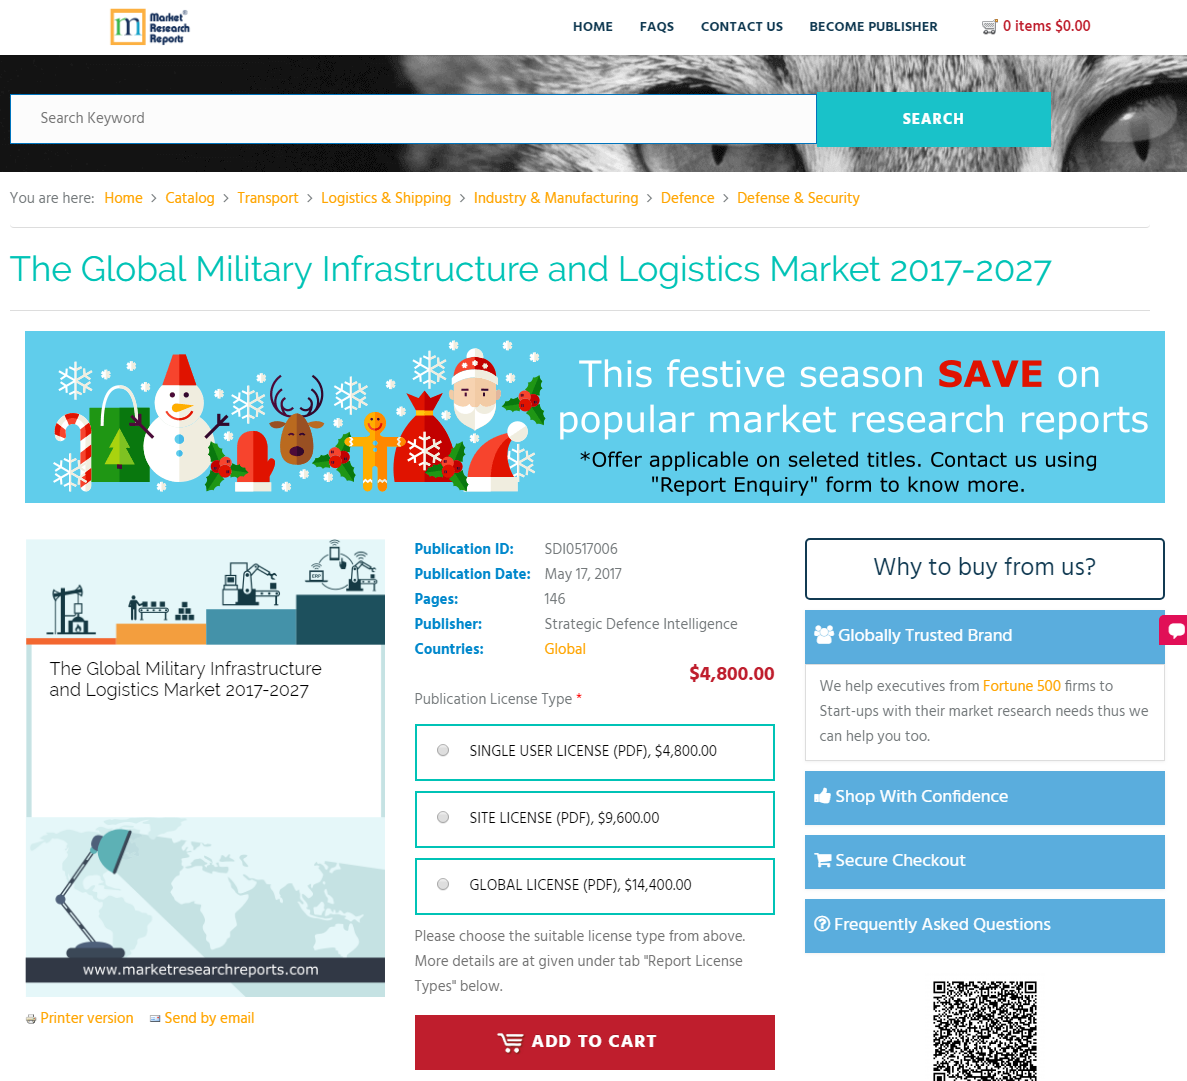 The Global Military Infrastructure and Logistics Market 2017